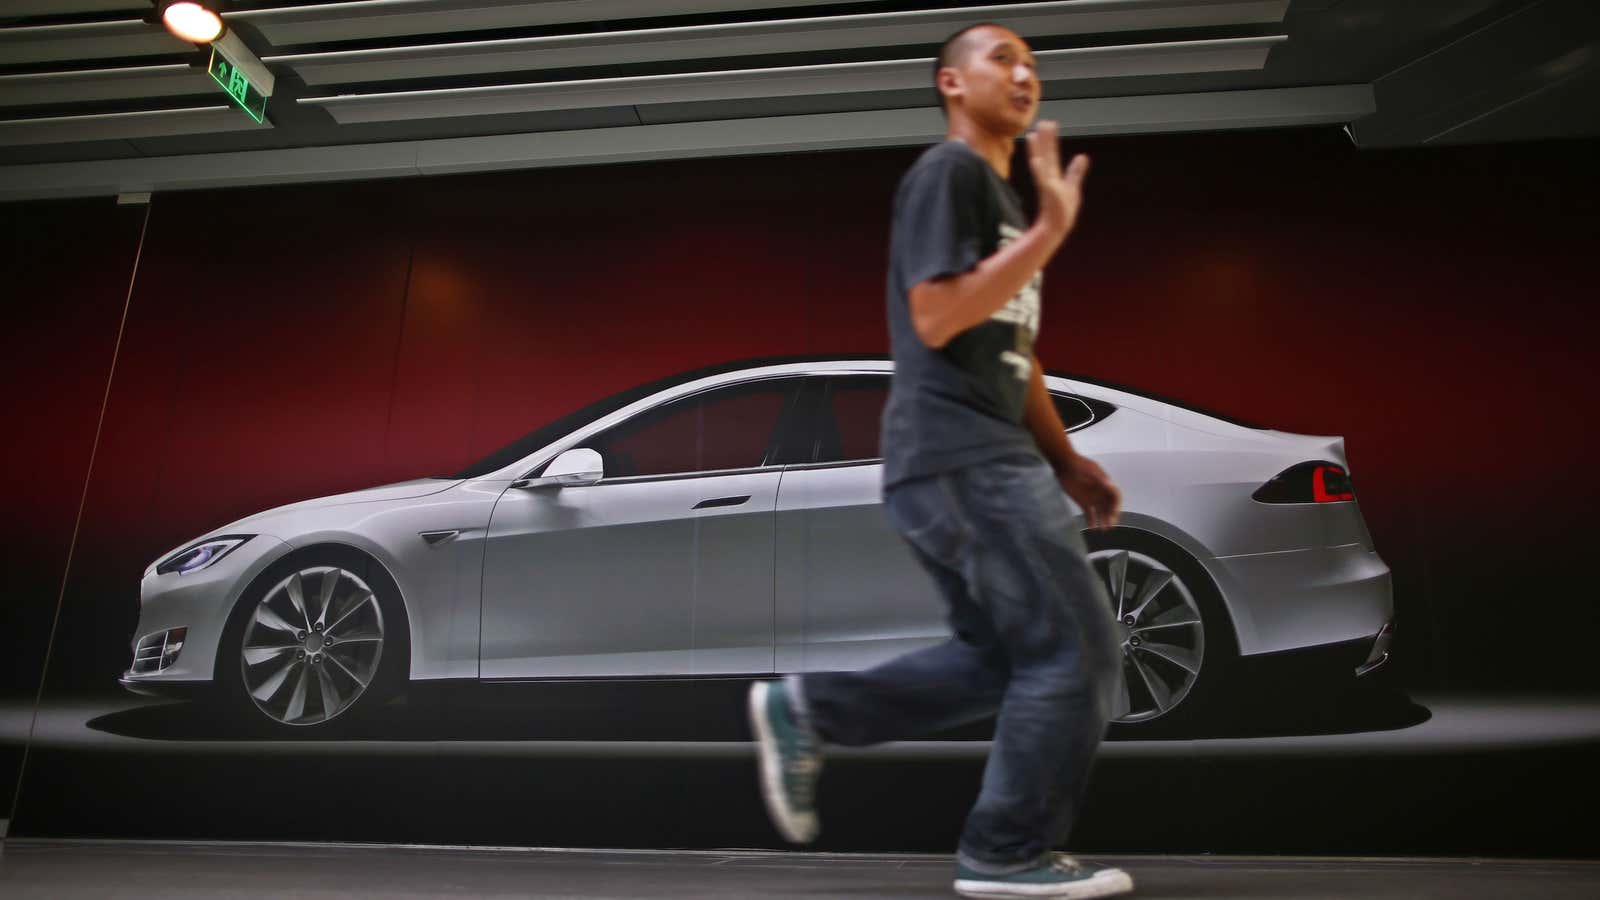 The pricey Tesla may be enough to make most buyers in China run.